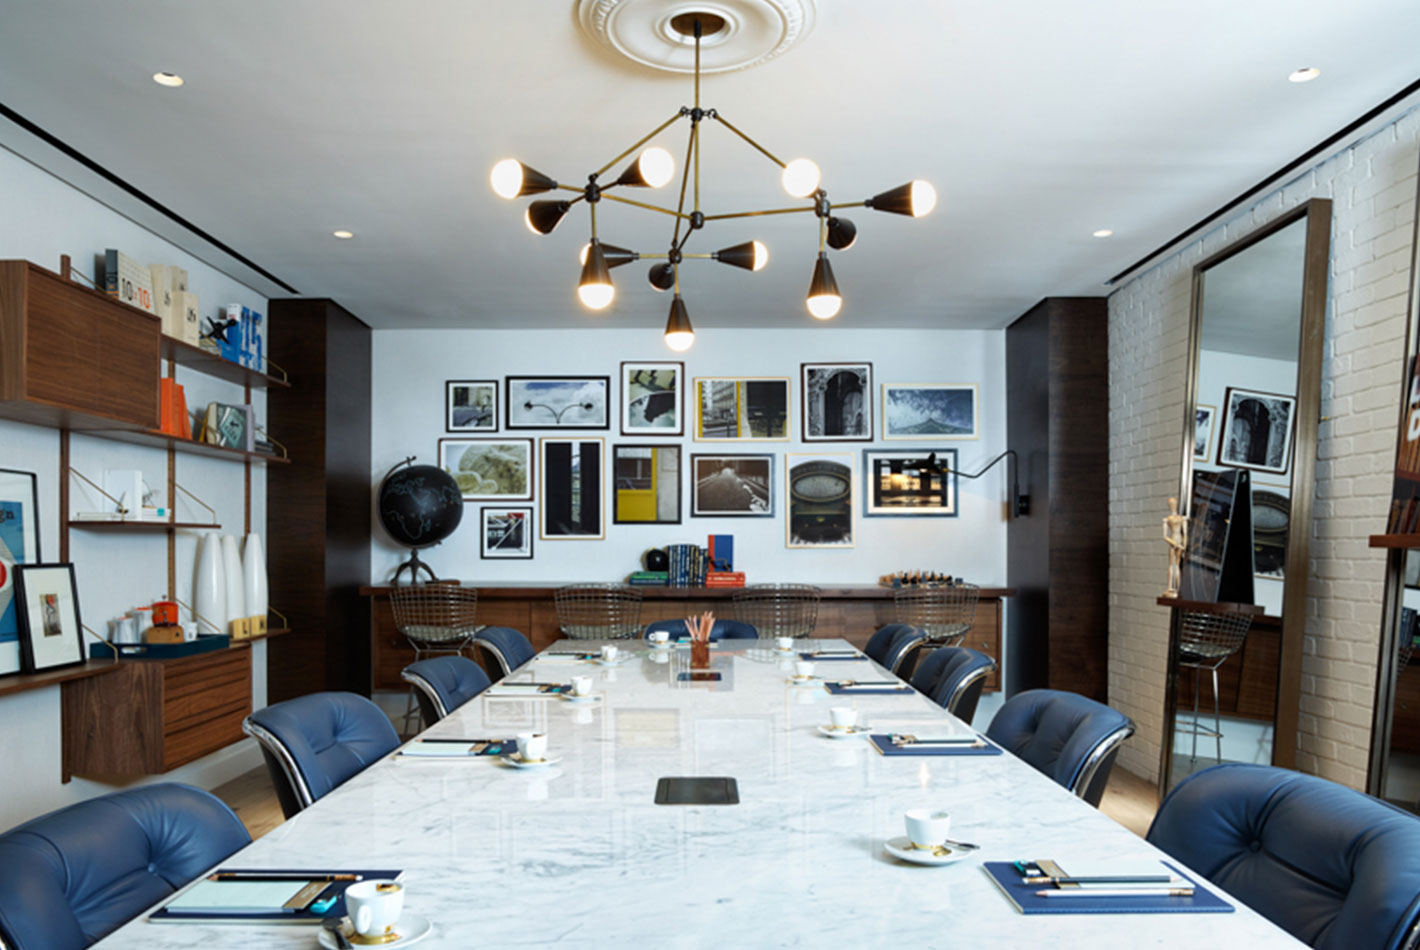 A full conference room at the Starwood Design Studio features a long white marble table and leather upholstered chairs.